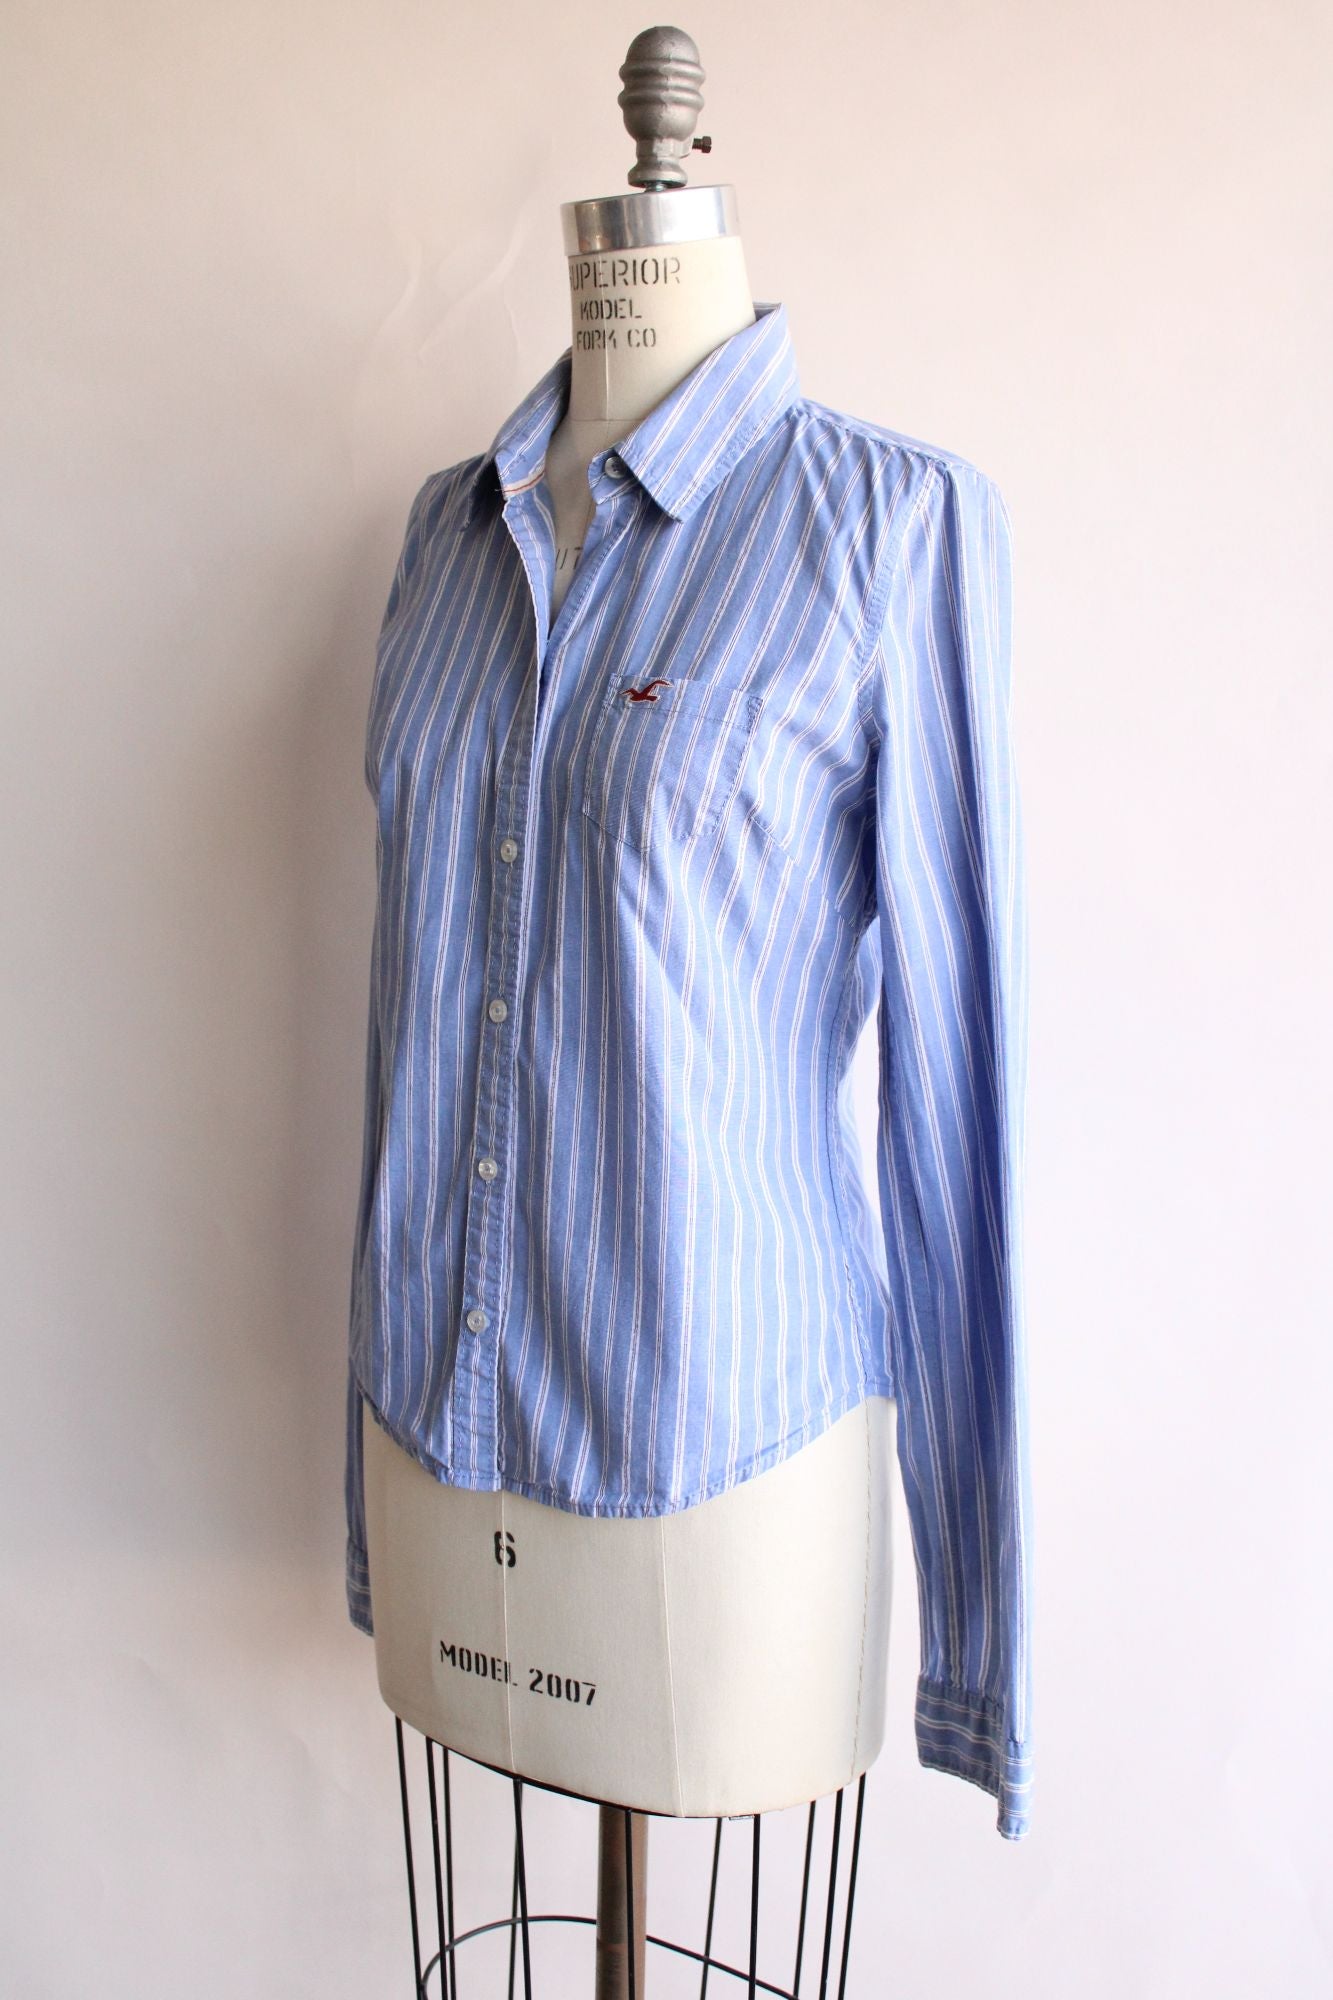 Hollister Button Down Shirt, womens, Size Large, BLue and White Stripe, Cotton spandex